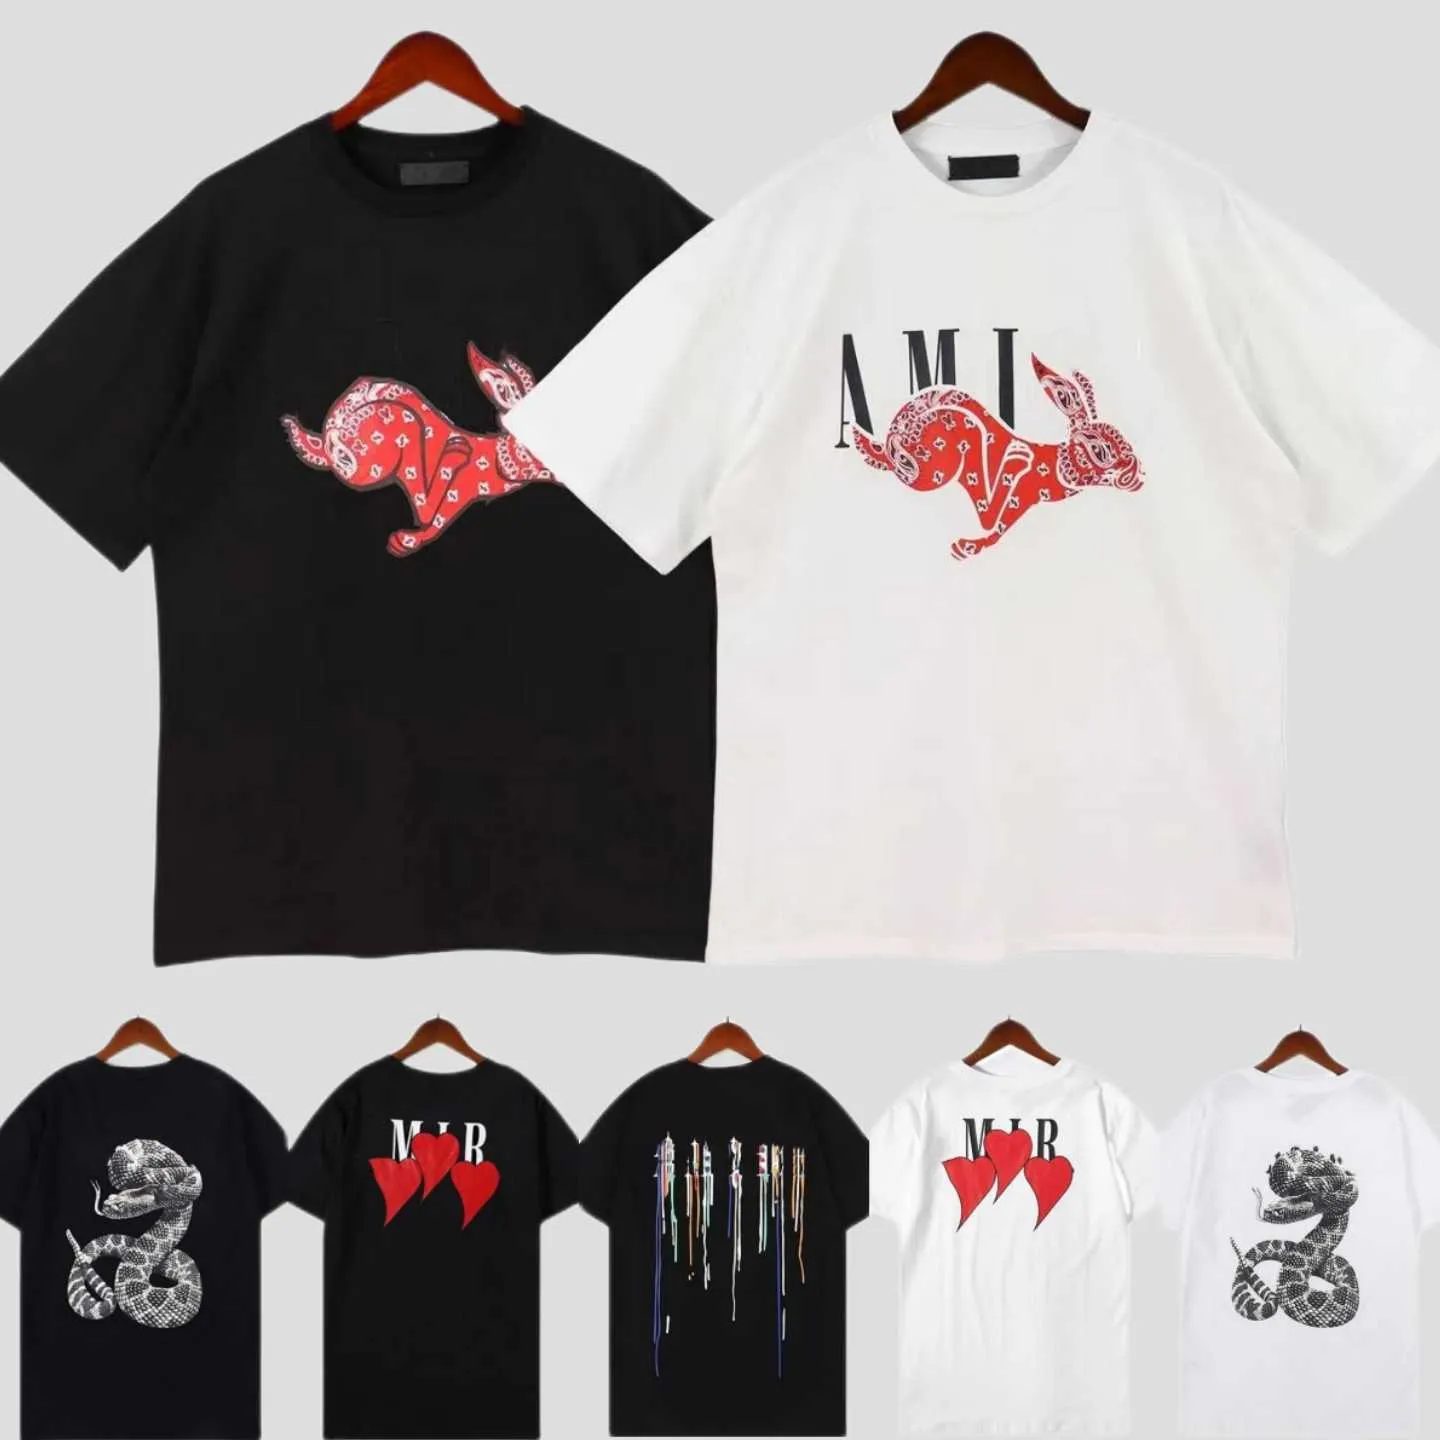 Limited Edition Designer t Shirt of 23ss Rabbit Year New Couples Tees Street Wear Summer Fashion Shirt Splash-ink Letter Print Design Couple Short Sleeves